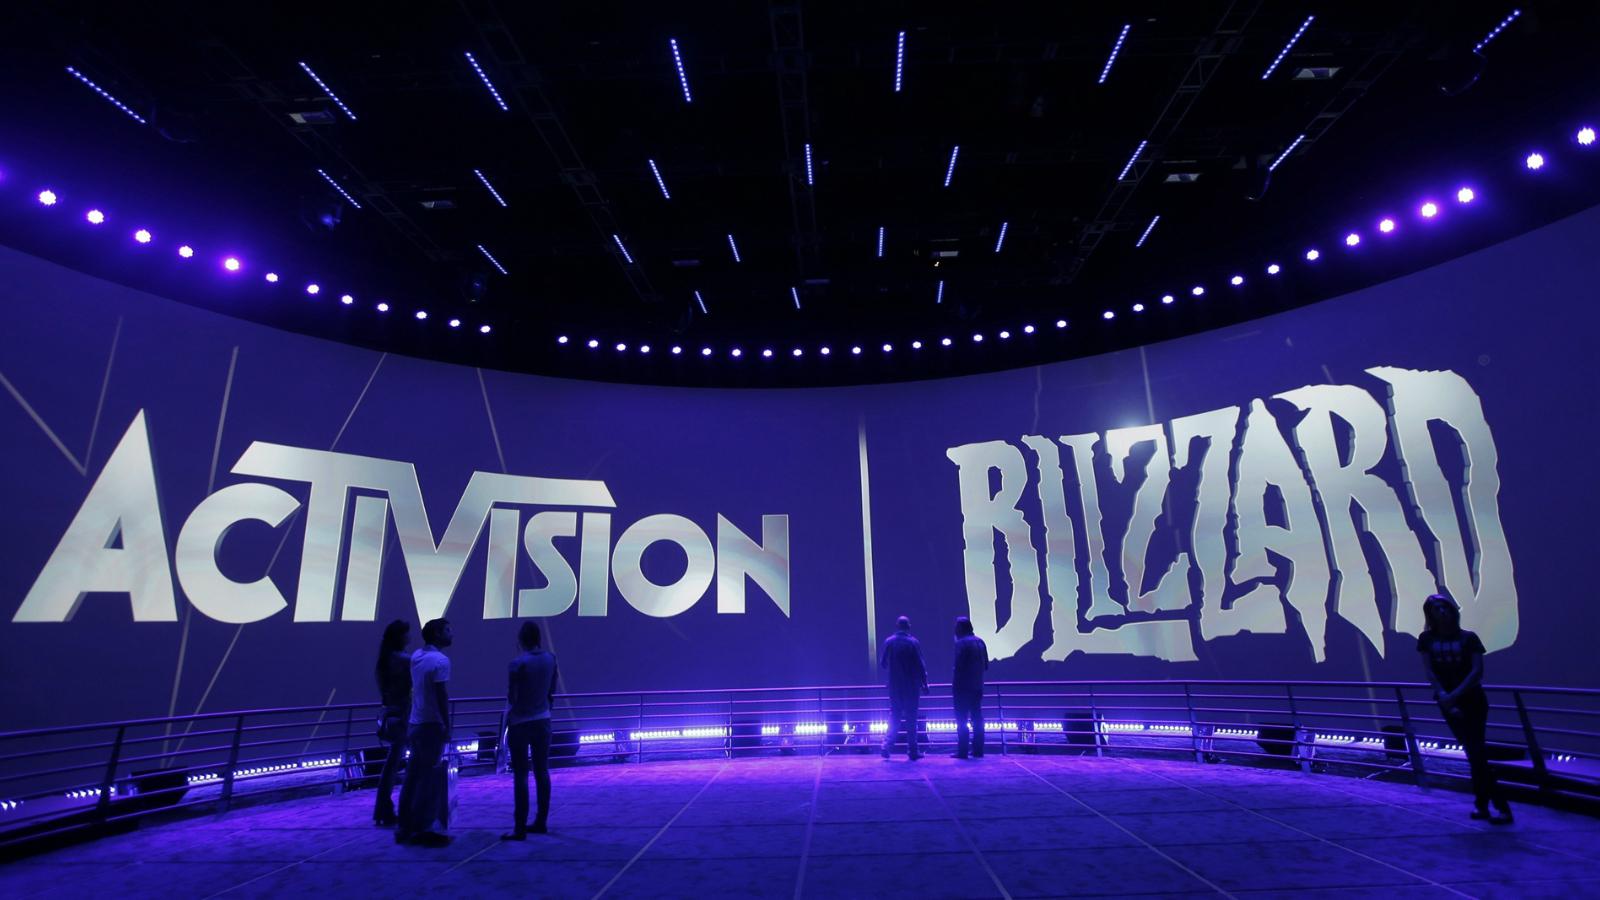 Activision Blizzard logos in an event space